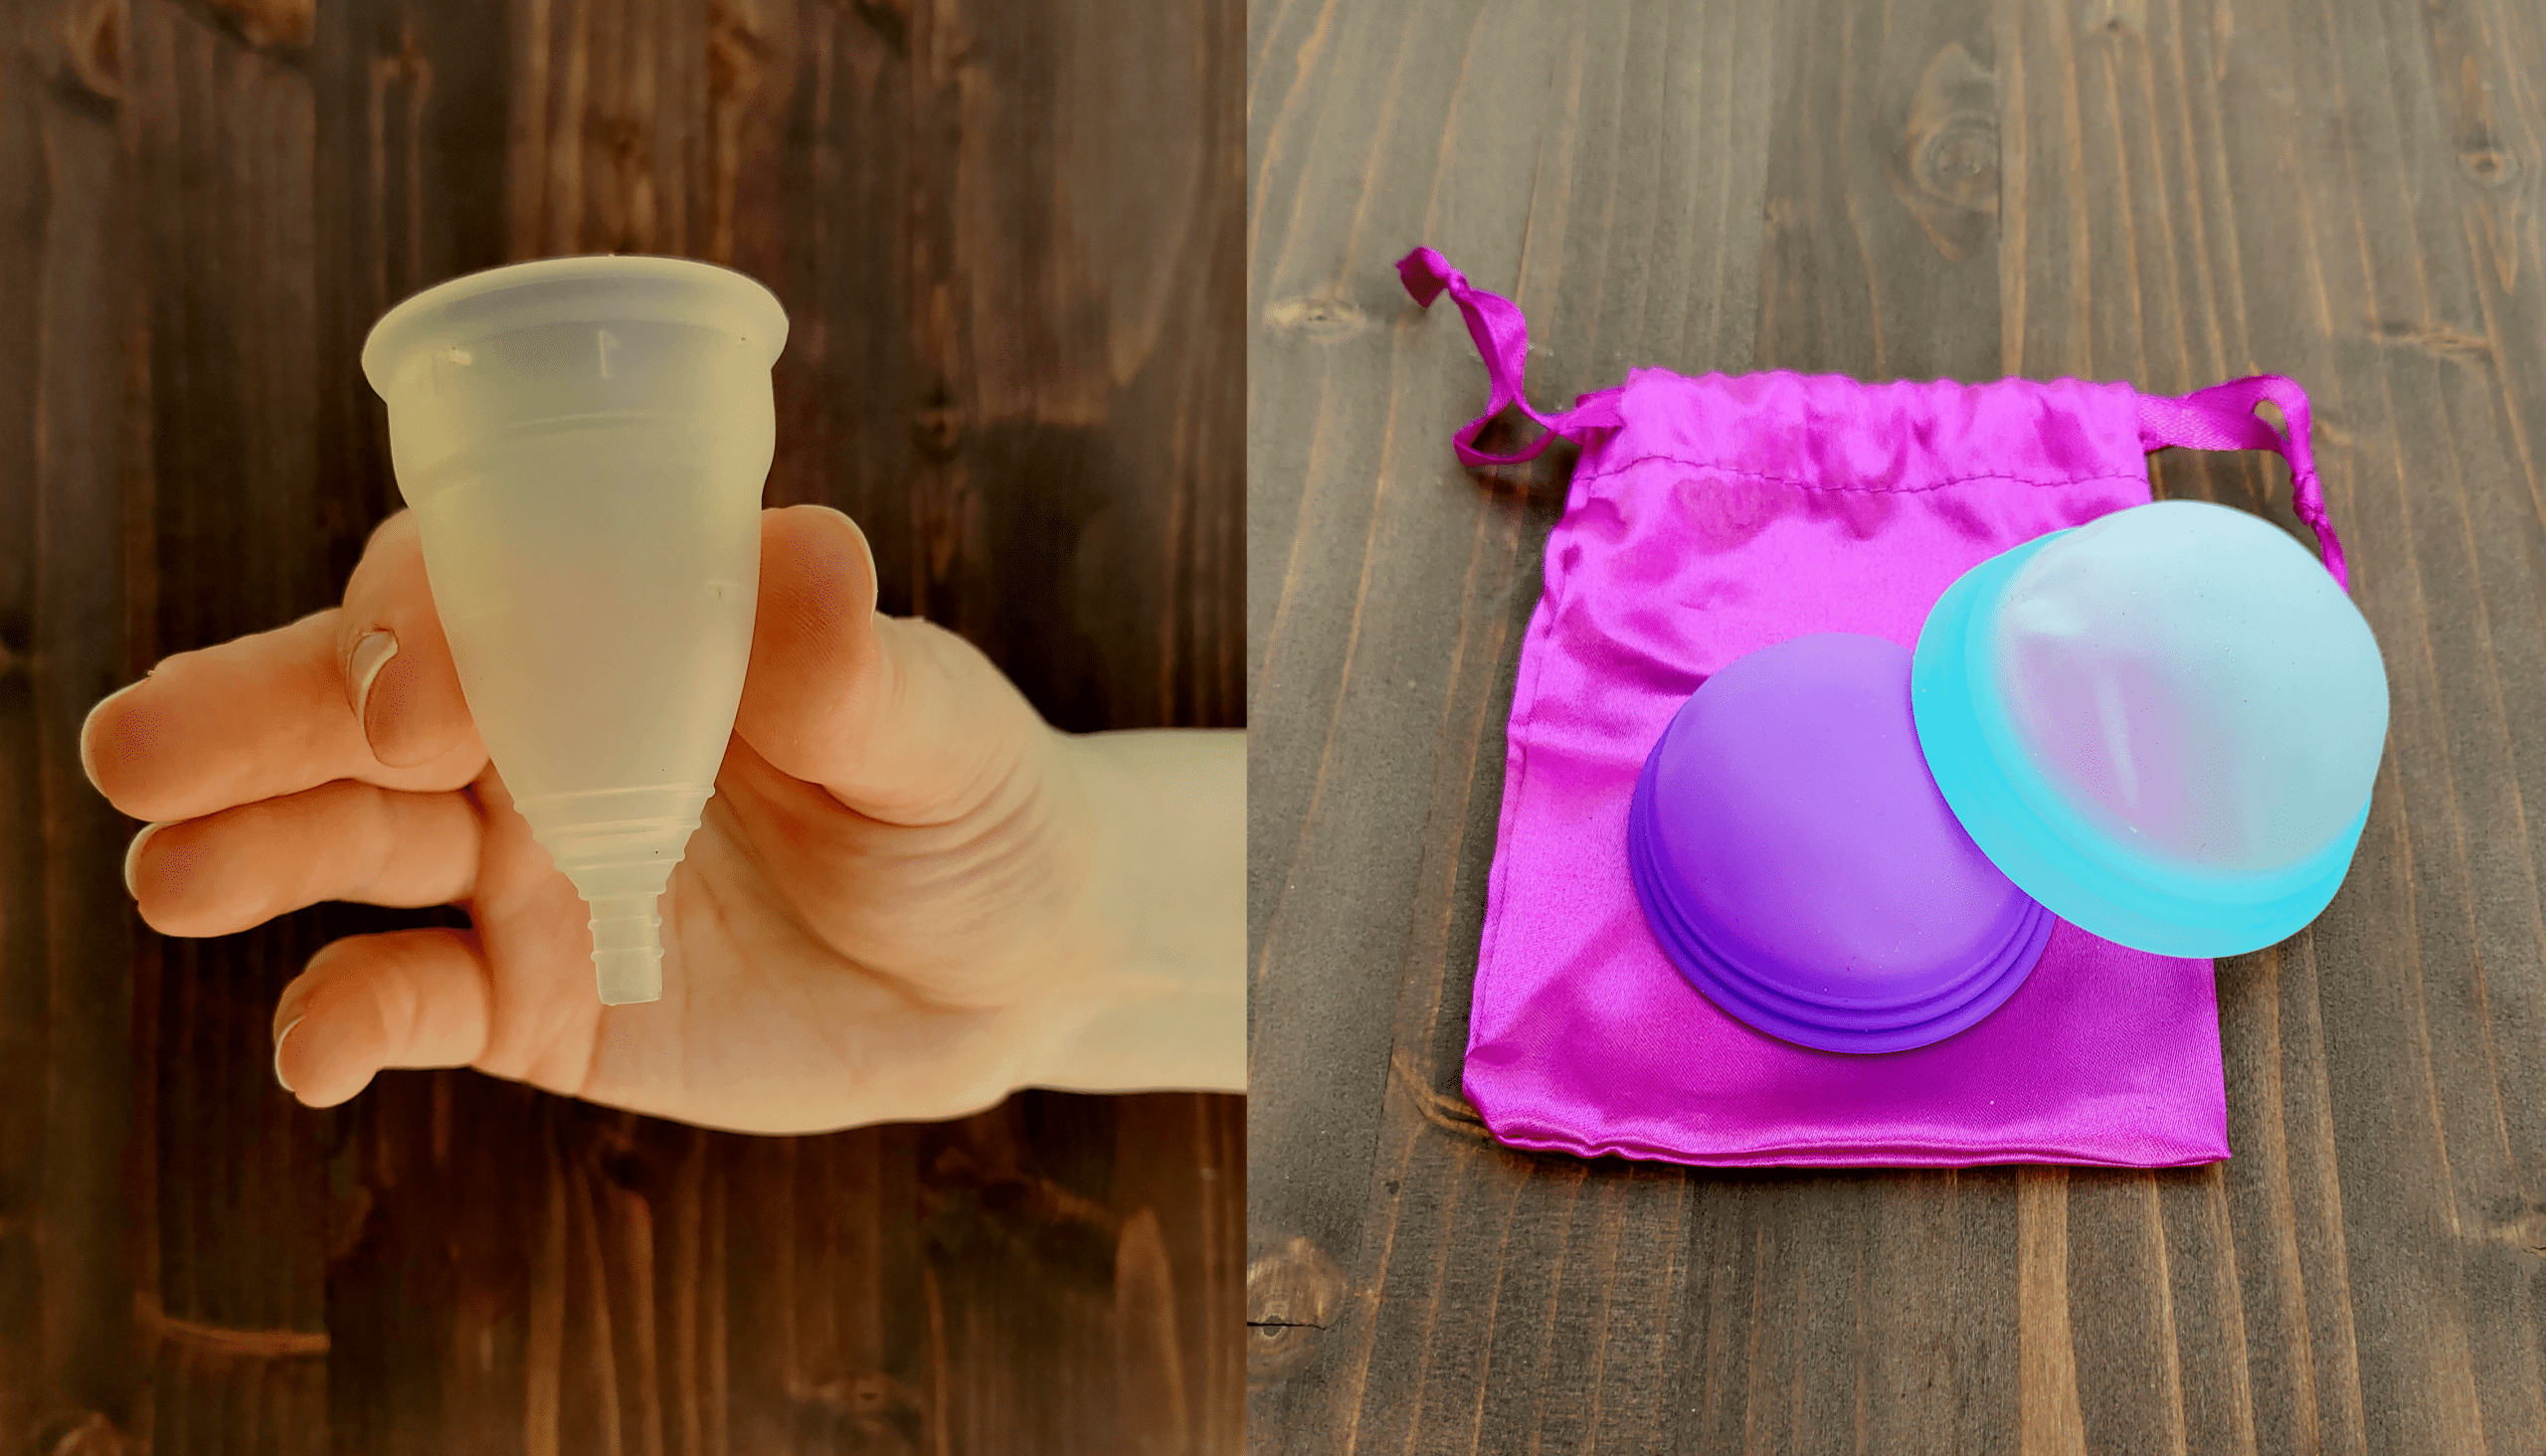 Examples of a menstrual cup and menstrual disks.